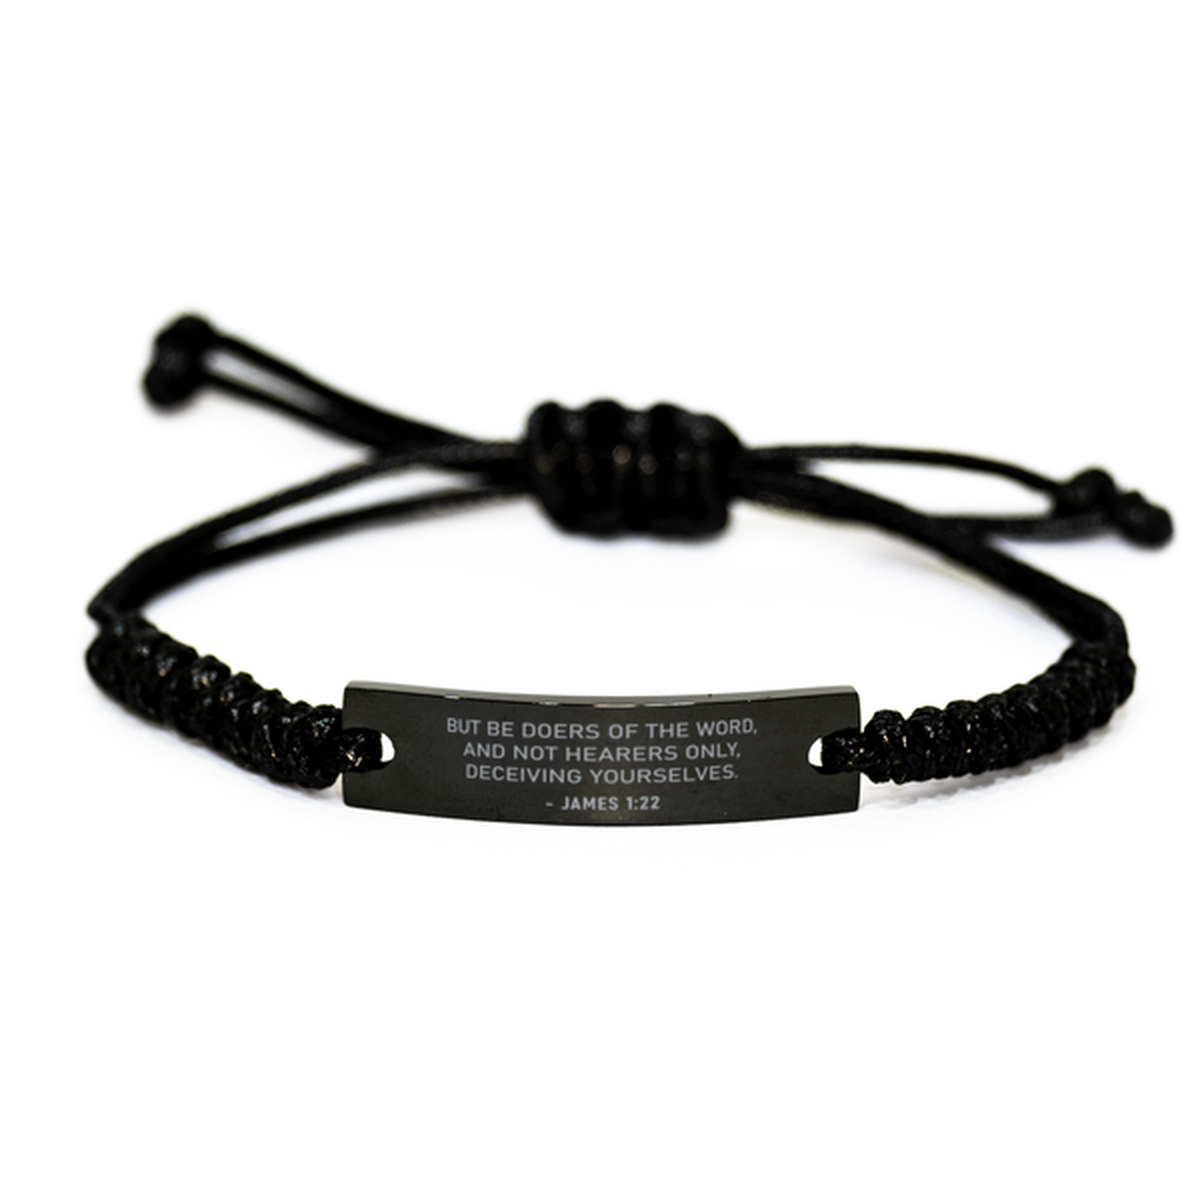 Bible Verse Rope Bracelet, James 1:22 But Be Doers Of The Word, And Not Hearers Only,, Christian Encouraging Gifts For Men Women Boys Girls